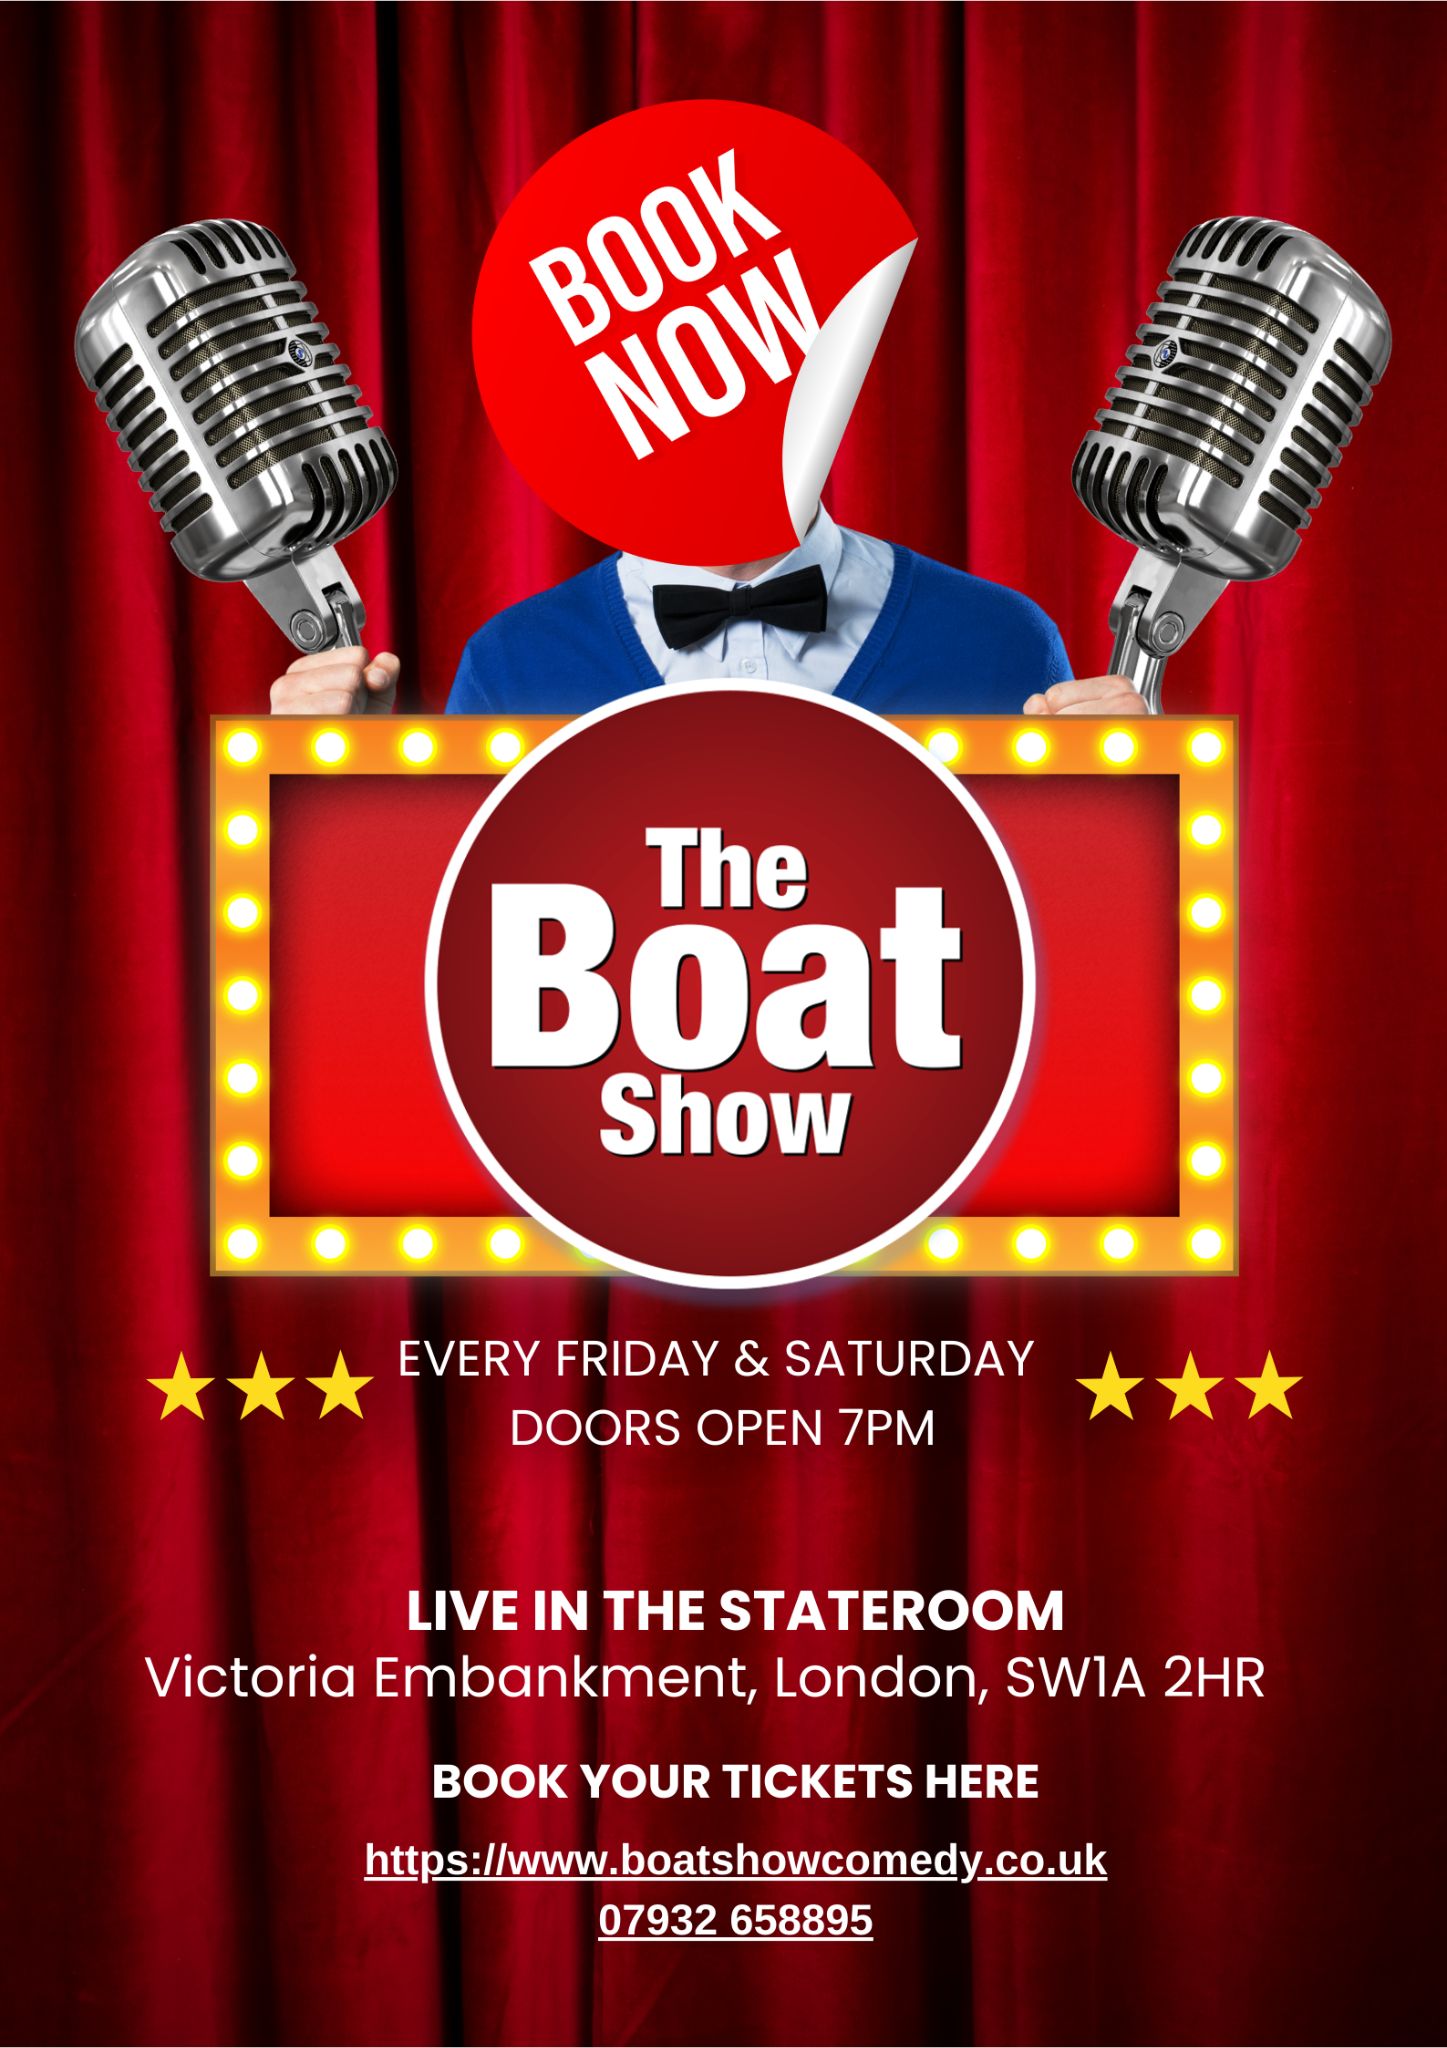 THE BOAT SHOW COMEDY SHOW EVERY SATURDAY